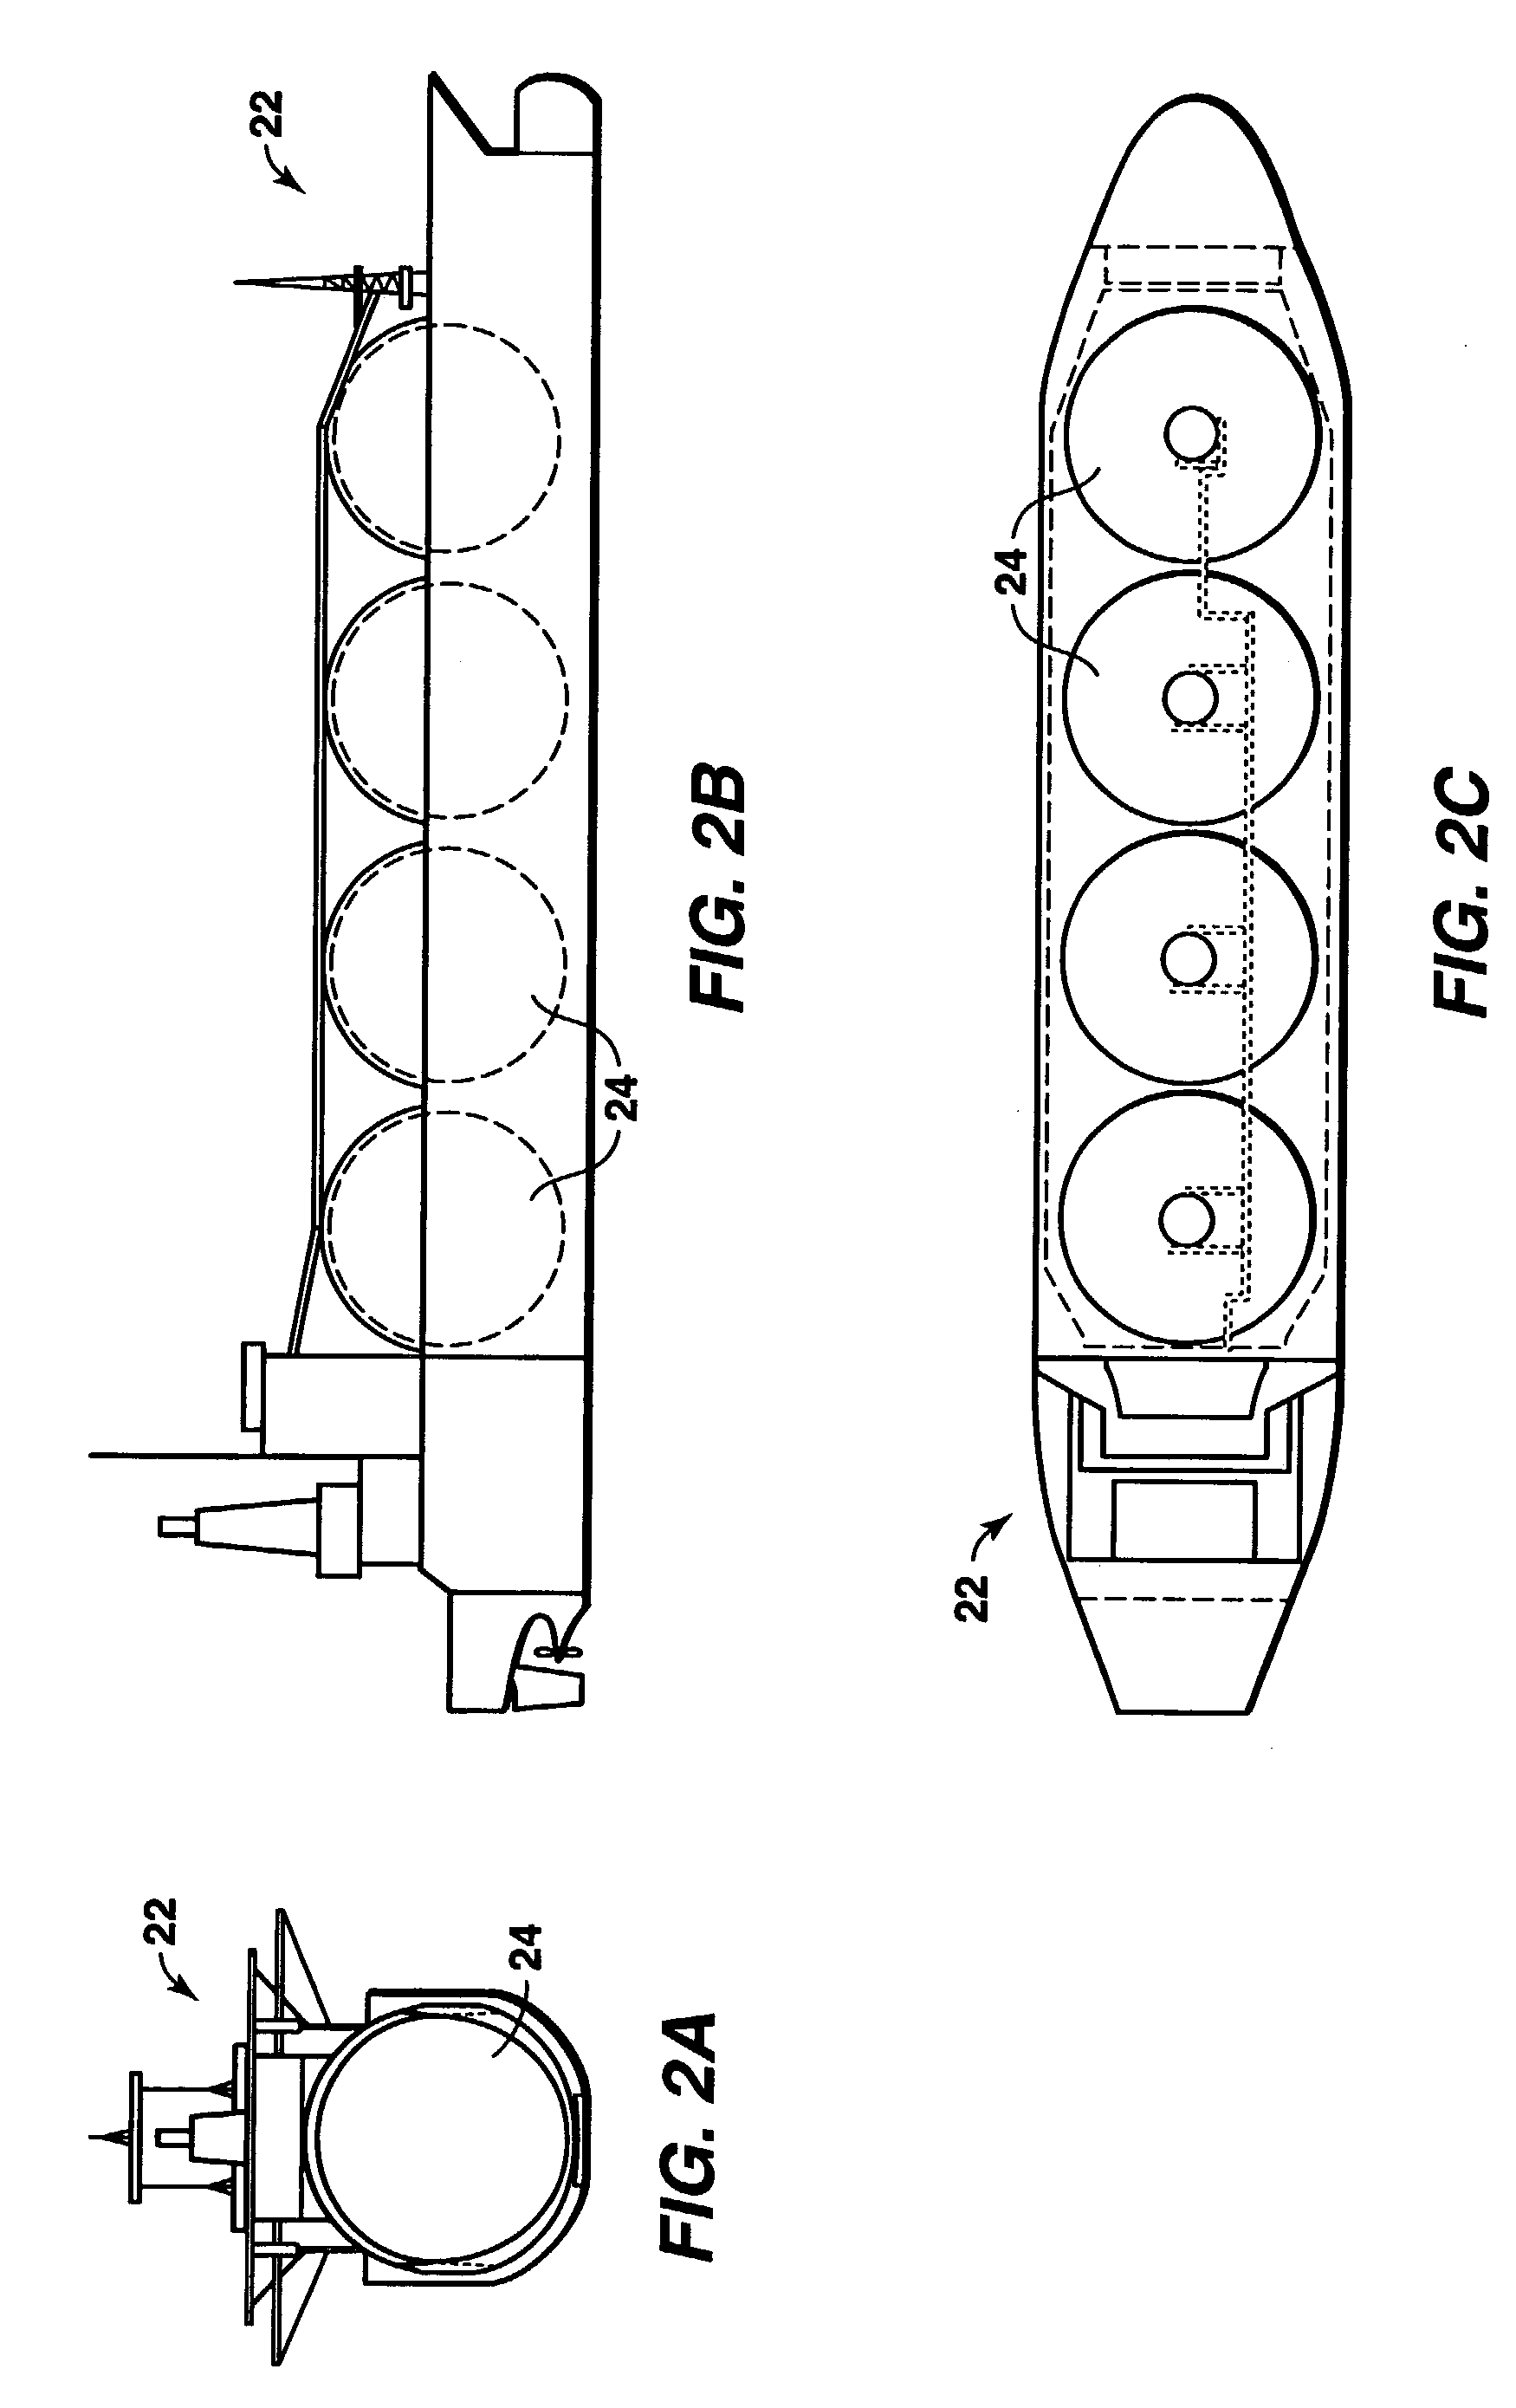 Containers and methods for containing pressurized fluids using reinforced fibers and methods for making such containers